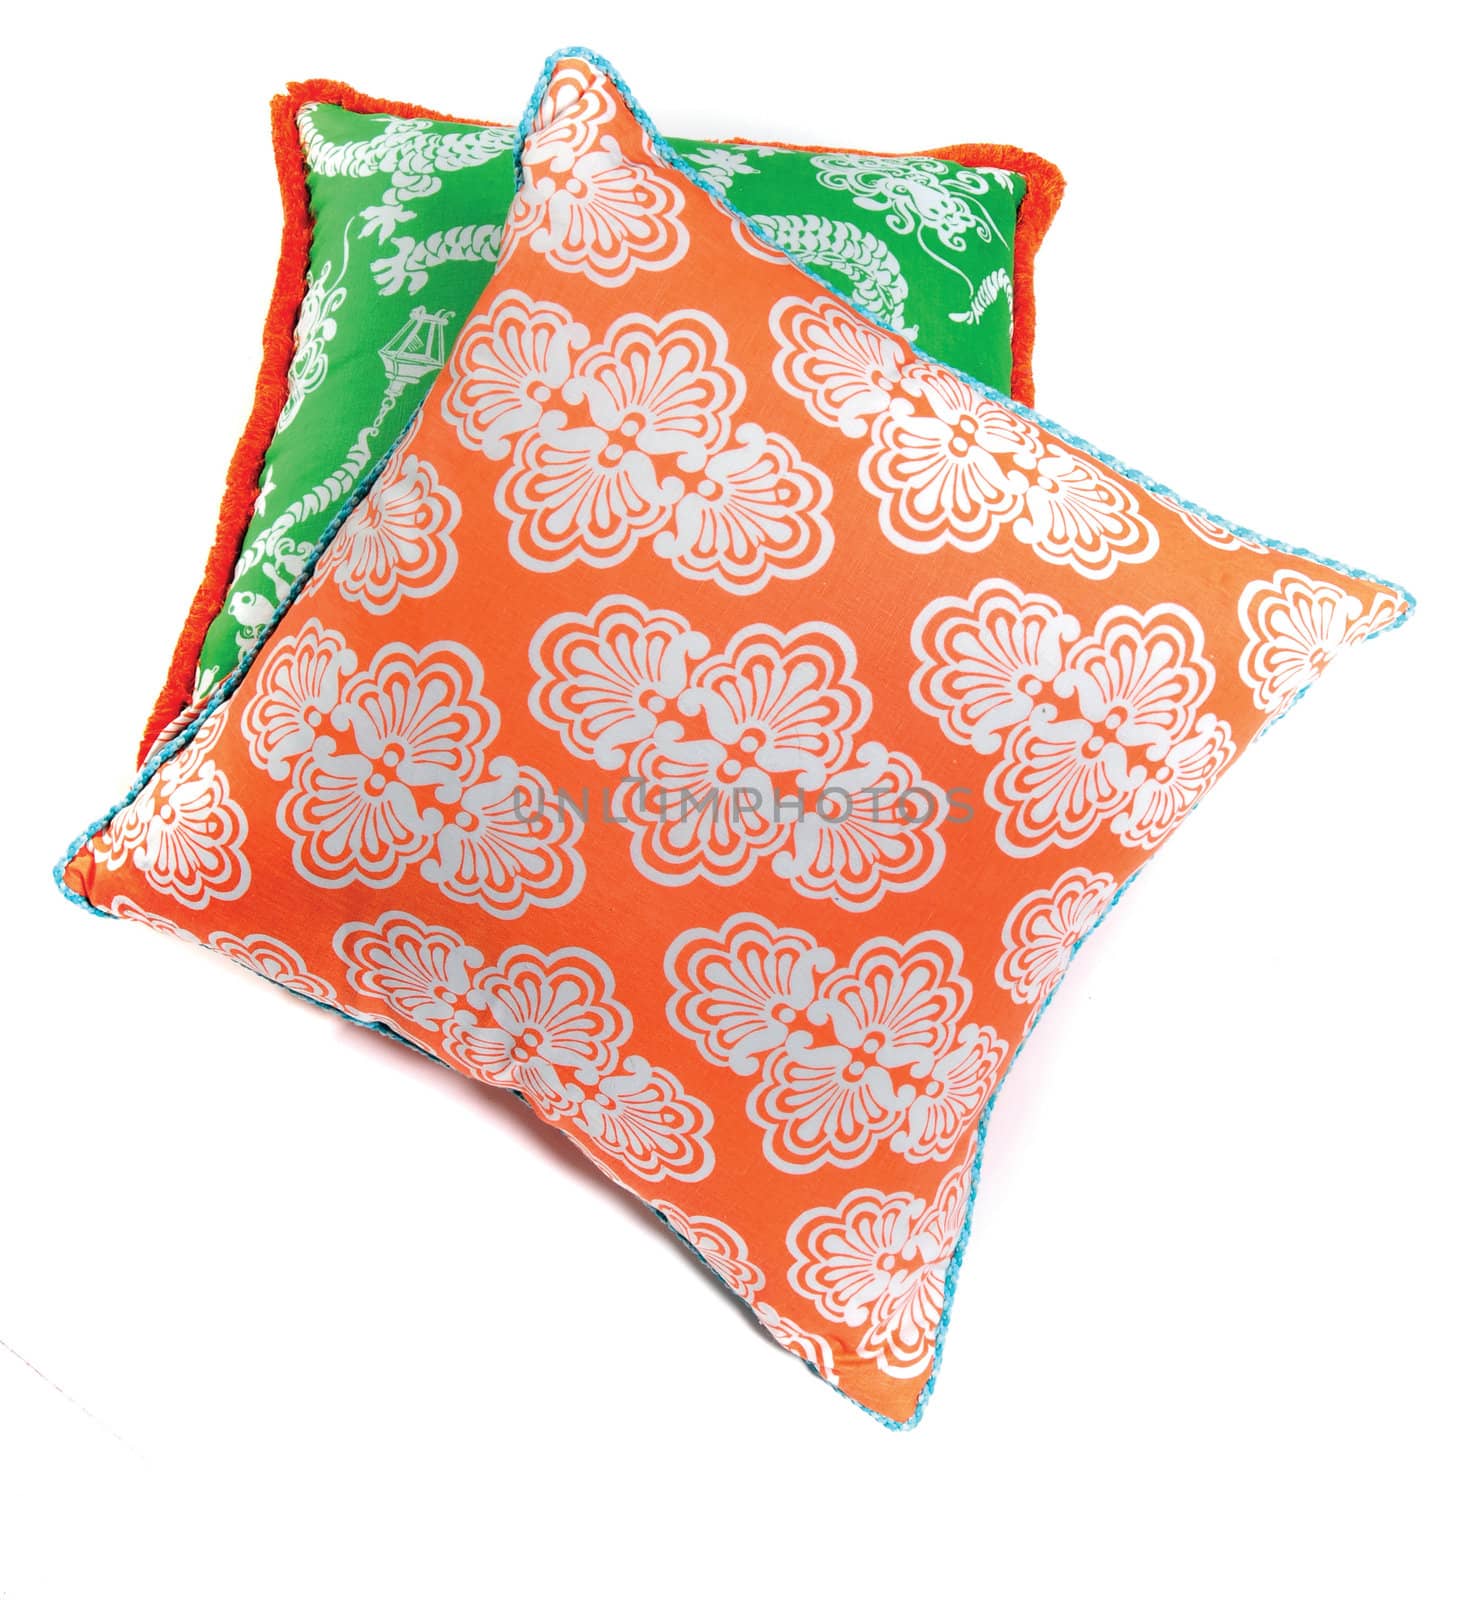 Bright orange and green pillows isolated on white background by ftlaudgirl